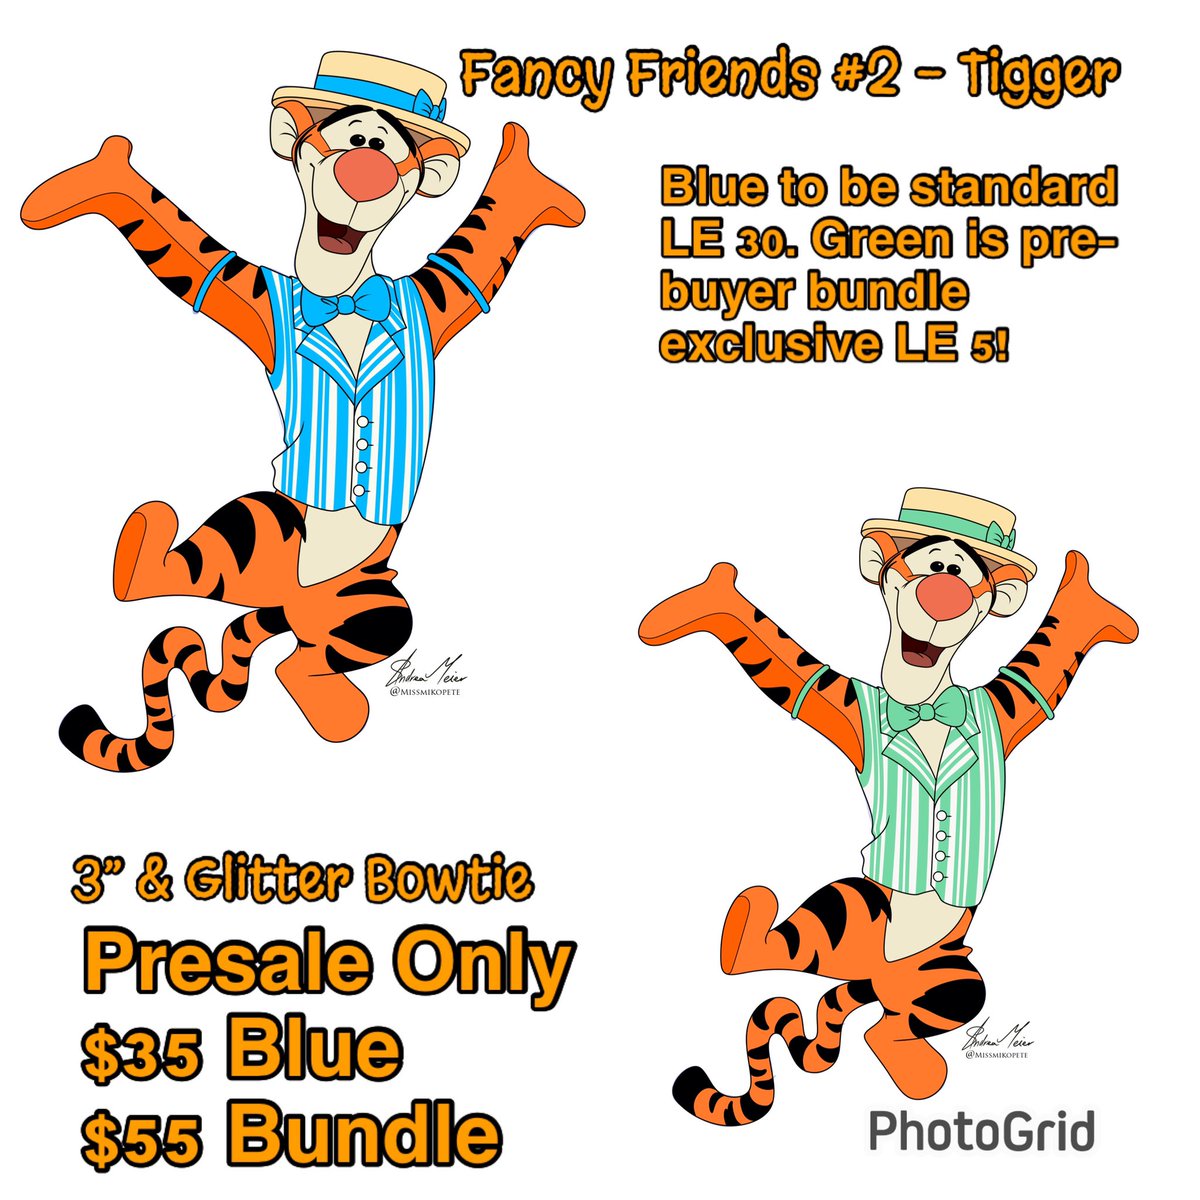 Presale Today! Details in pic. Fancy Friends Tigger - Dm here or on Insta @frankisafan #disneypin #disneypins #fantasypin #fantasypins #tigger #winniethepooh #pooh